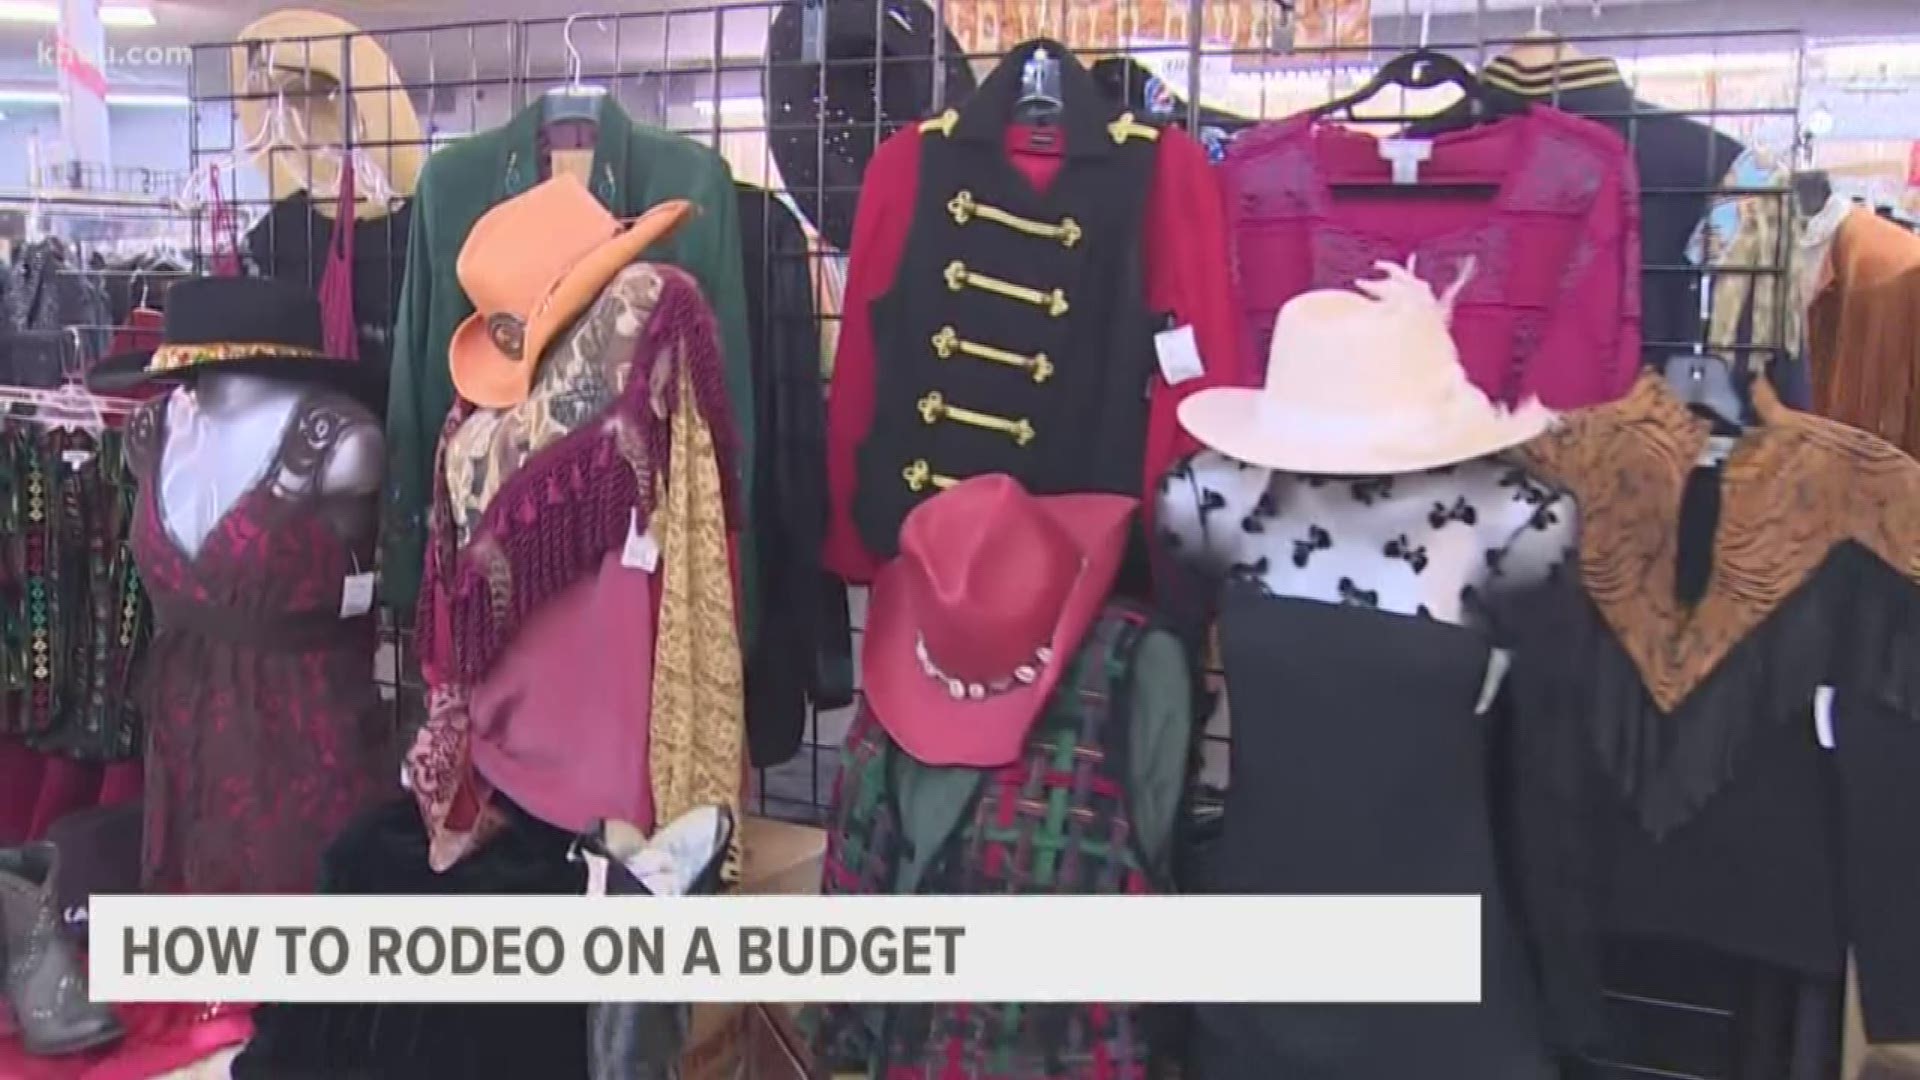 Don't know what to wear to the rodeo? No worries.  Here's how you can dress the part without breaking the bank.